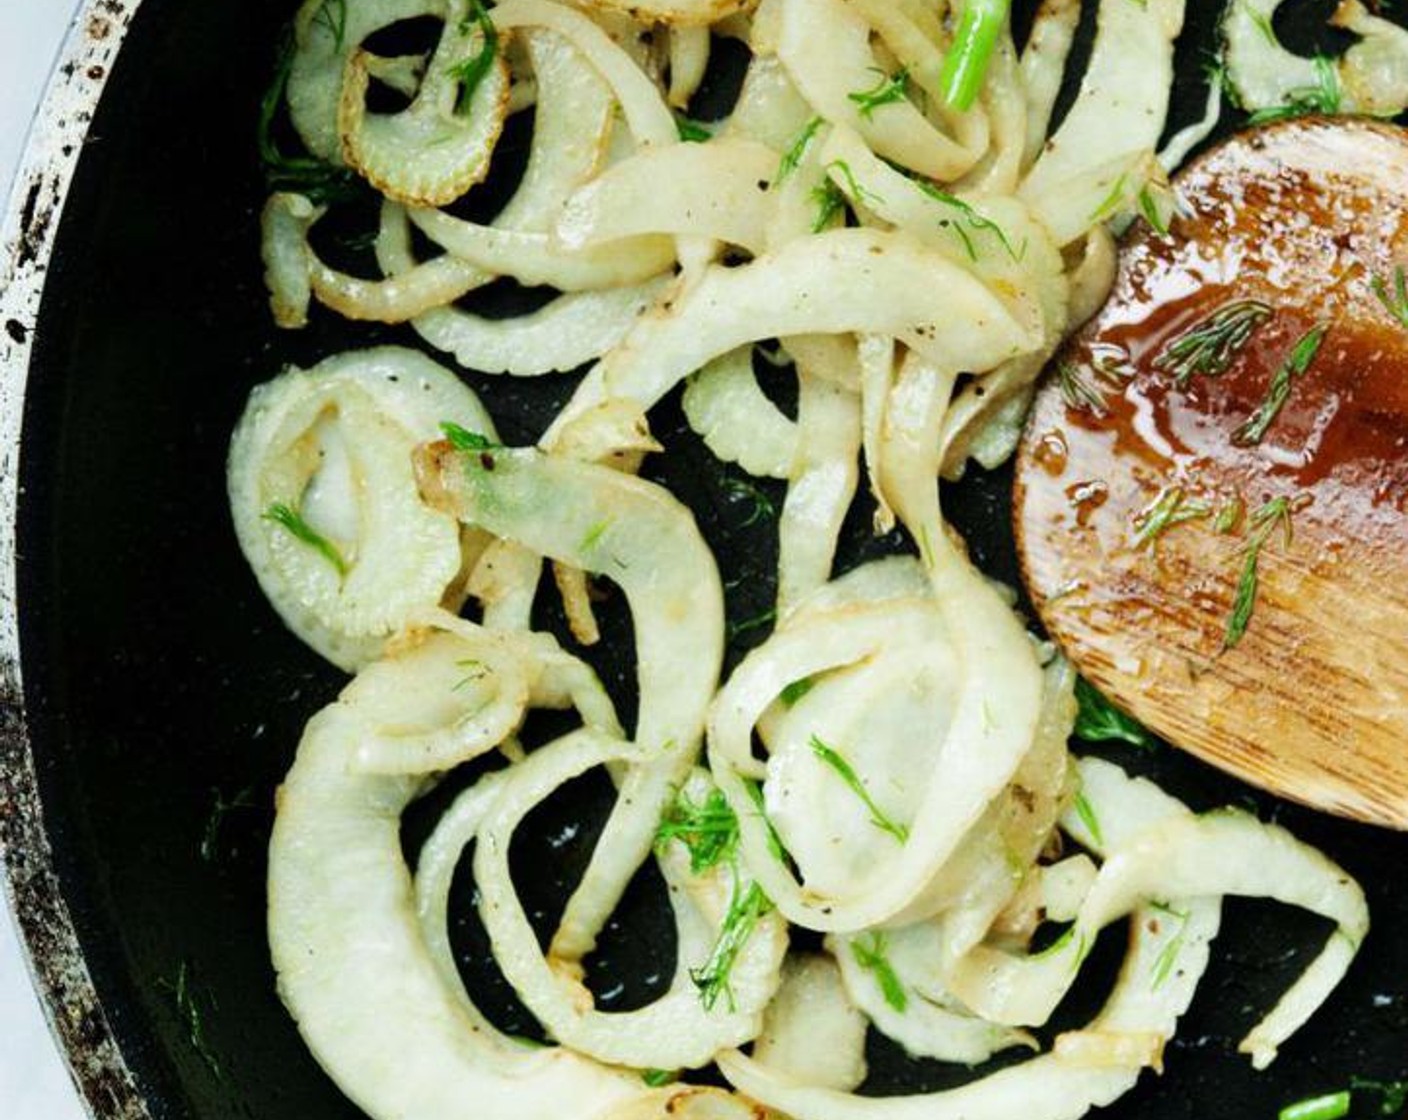 step 5 In a clean skillet add the remaining Extra-Virgin Olive Oil (1/2 tsp) when warm add the sliced fennel, salt and pepper and cook on medium until fennel is tender. Remove and set asides